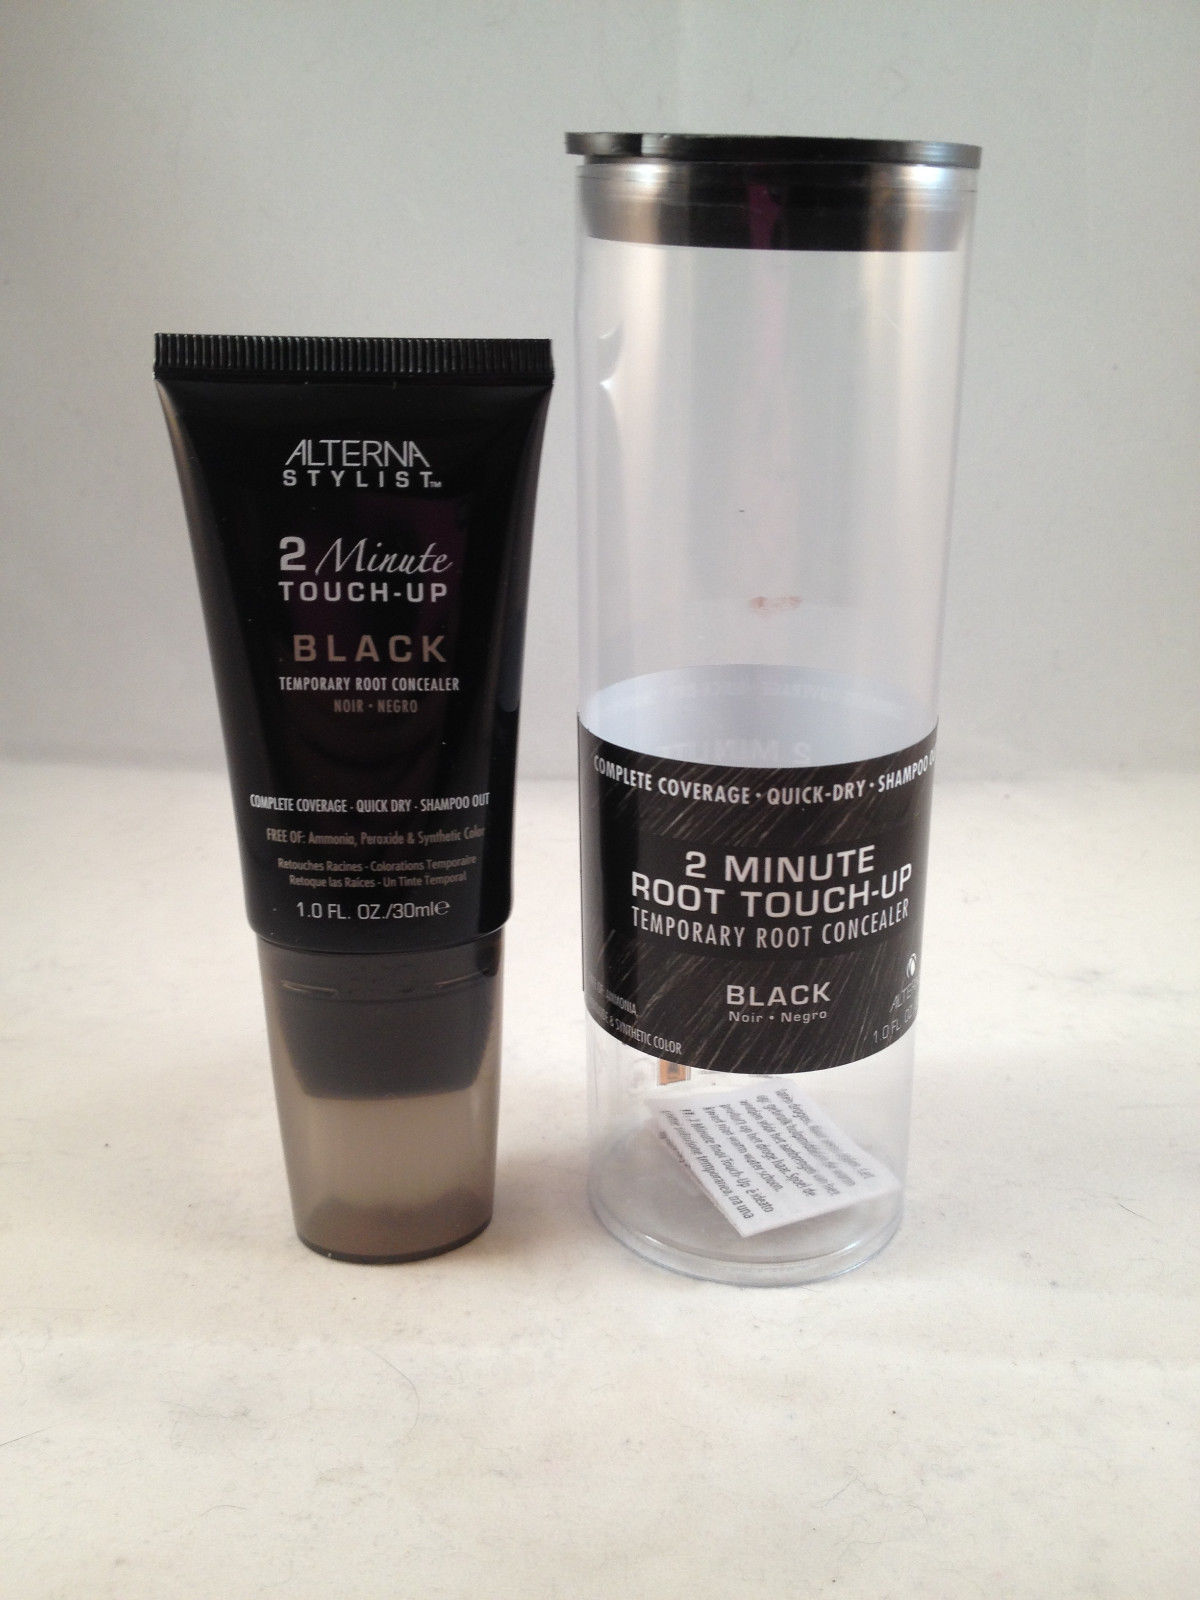 Alterna Stylist 2 Minute Root Touch-Up Black Temporary Root Concealer hair color - $20.92